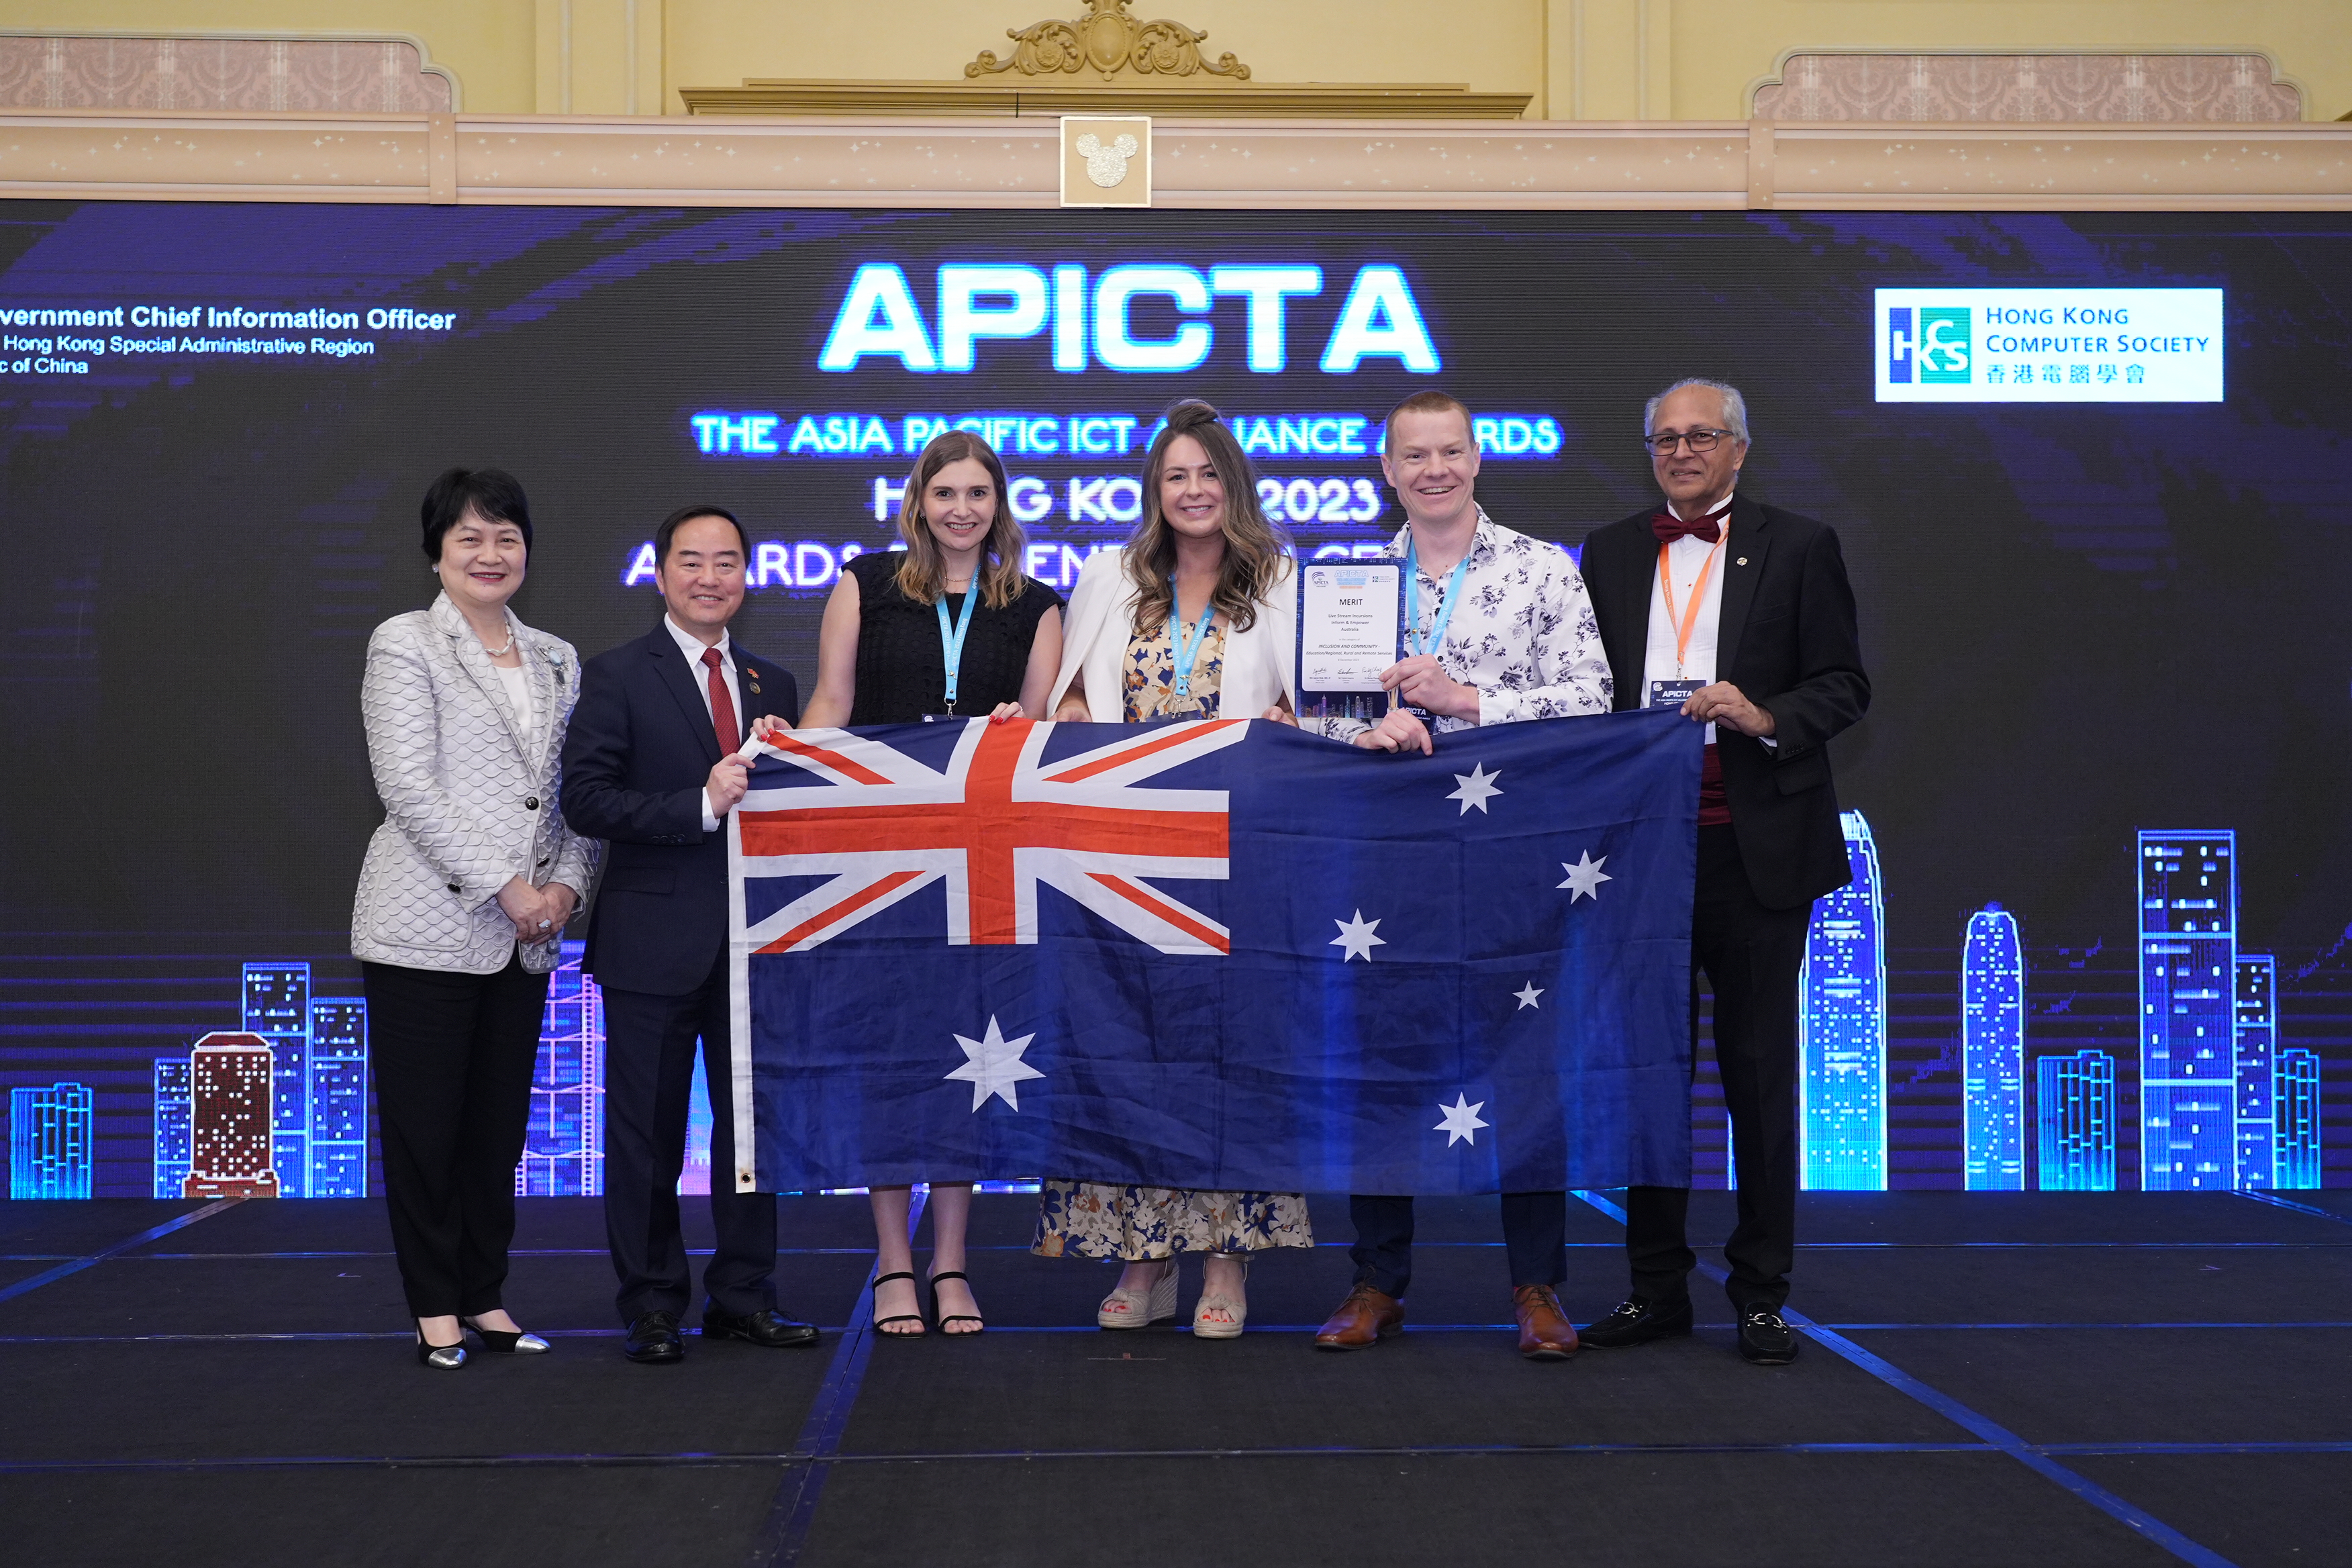 From iAward to APICTA success